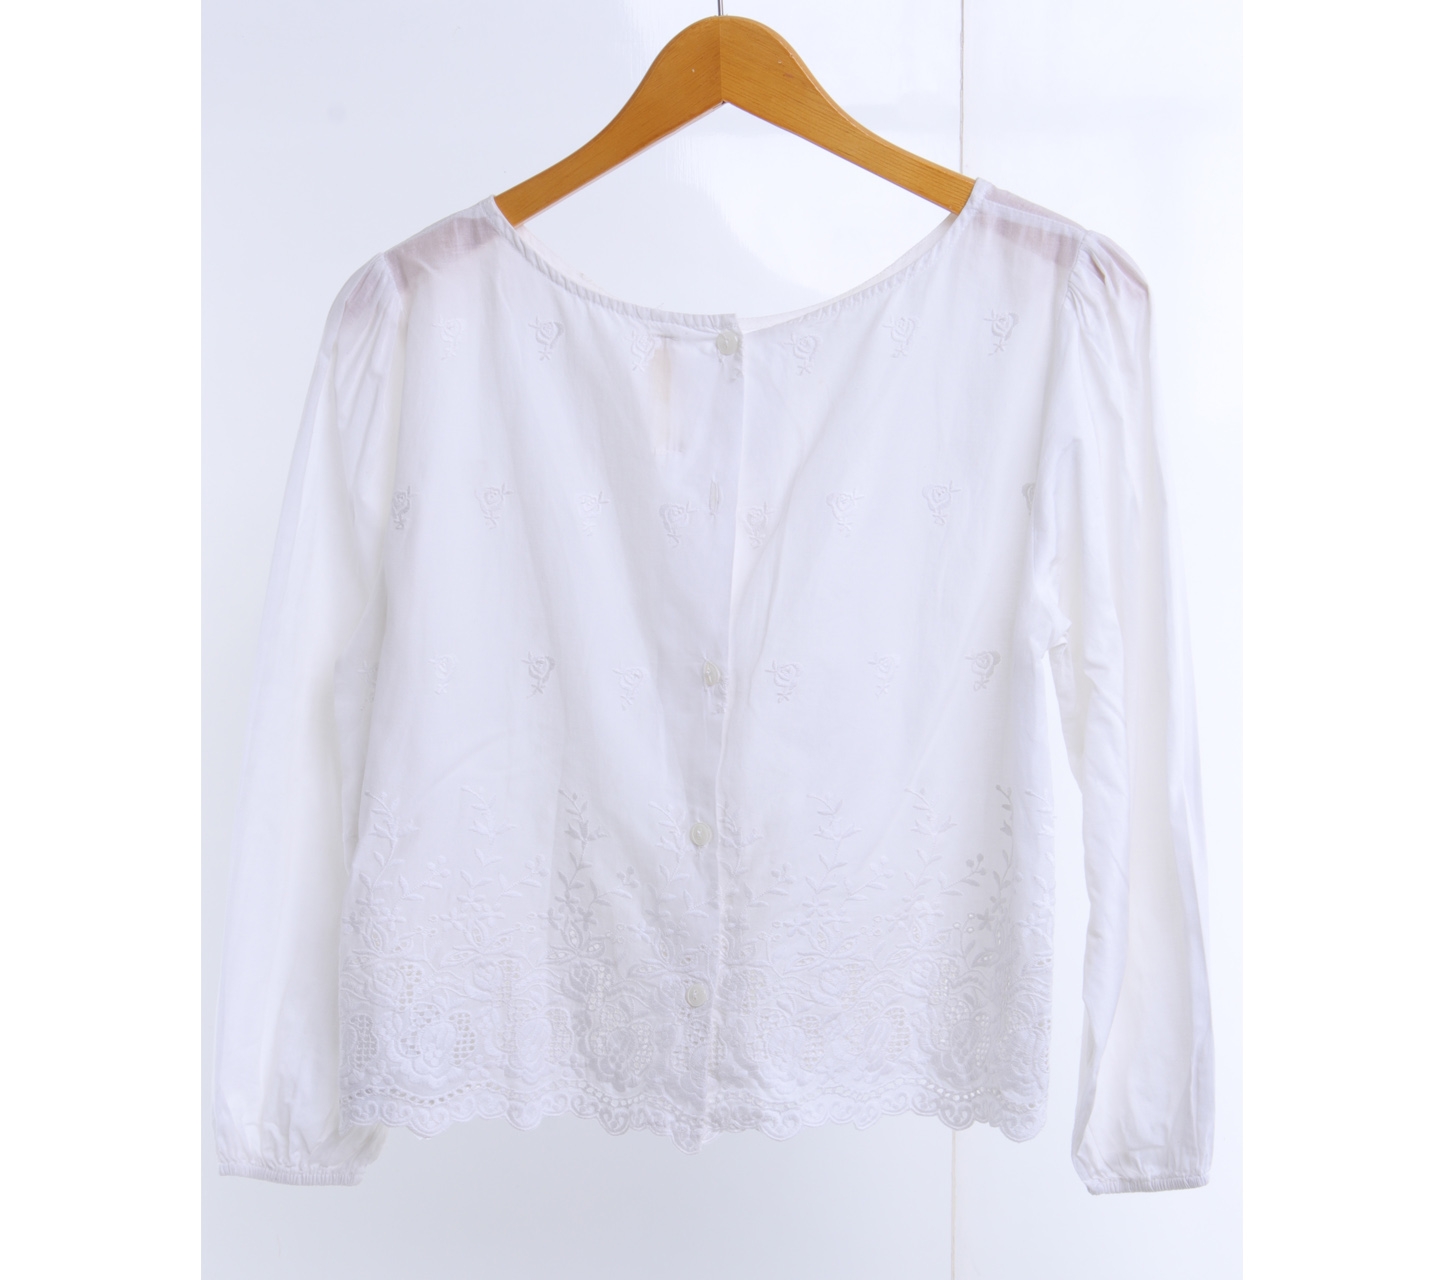 Plowbrands Off White Patterned Cropped Blouse